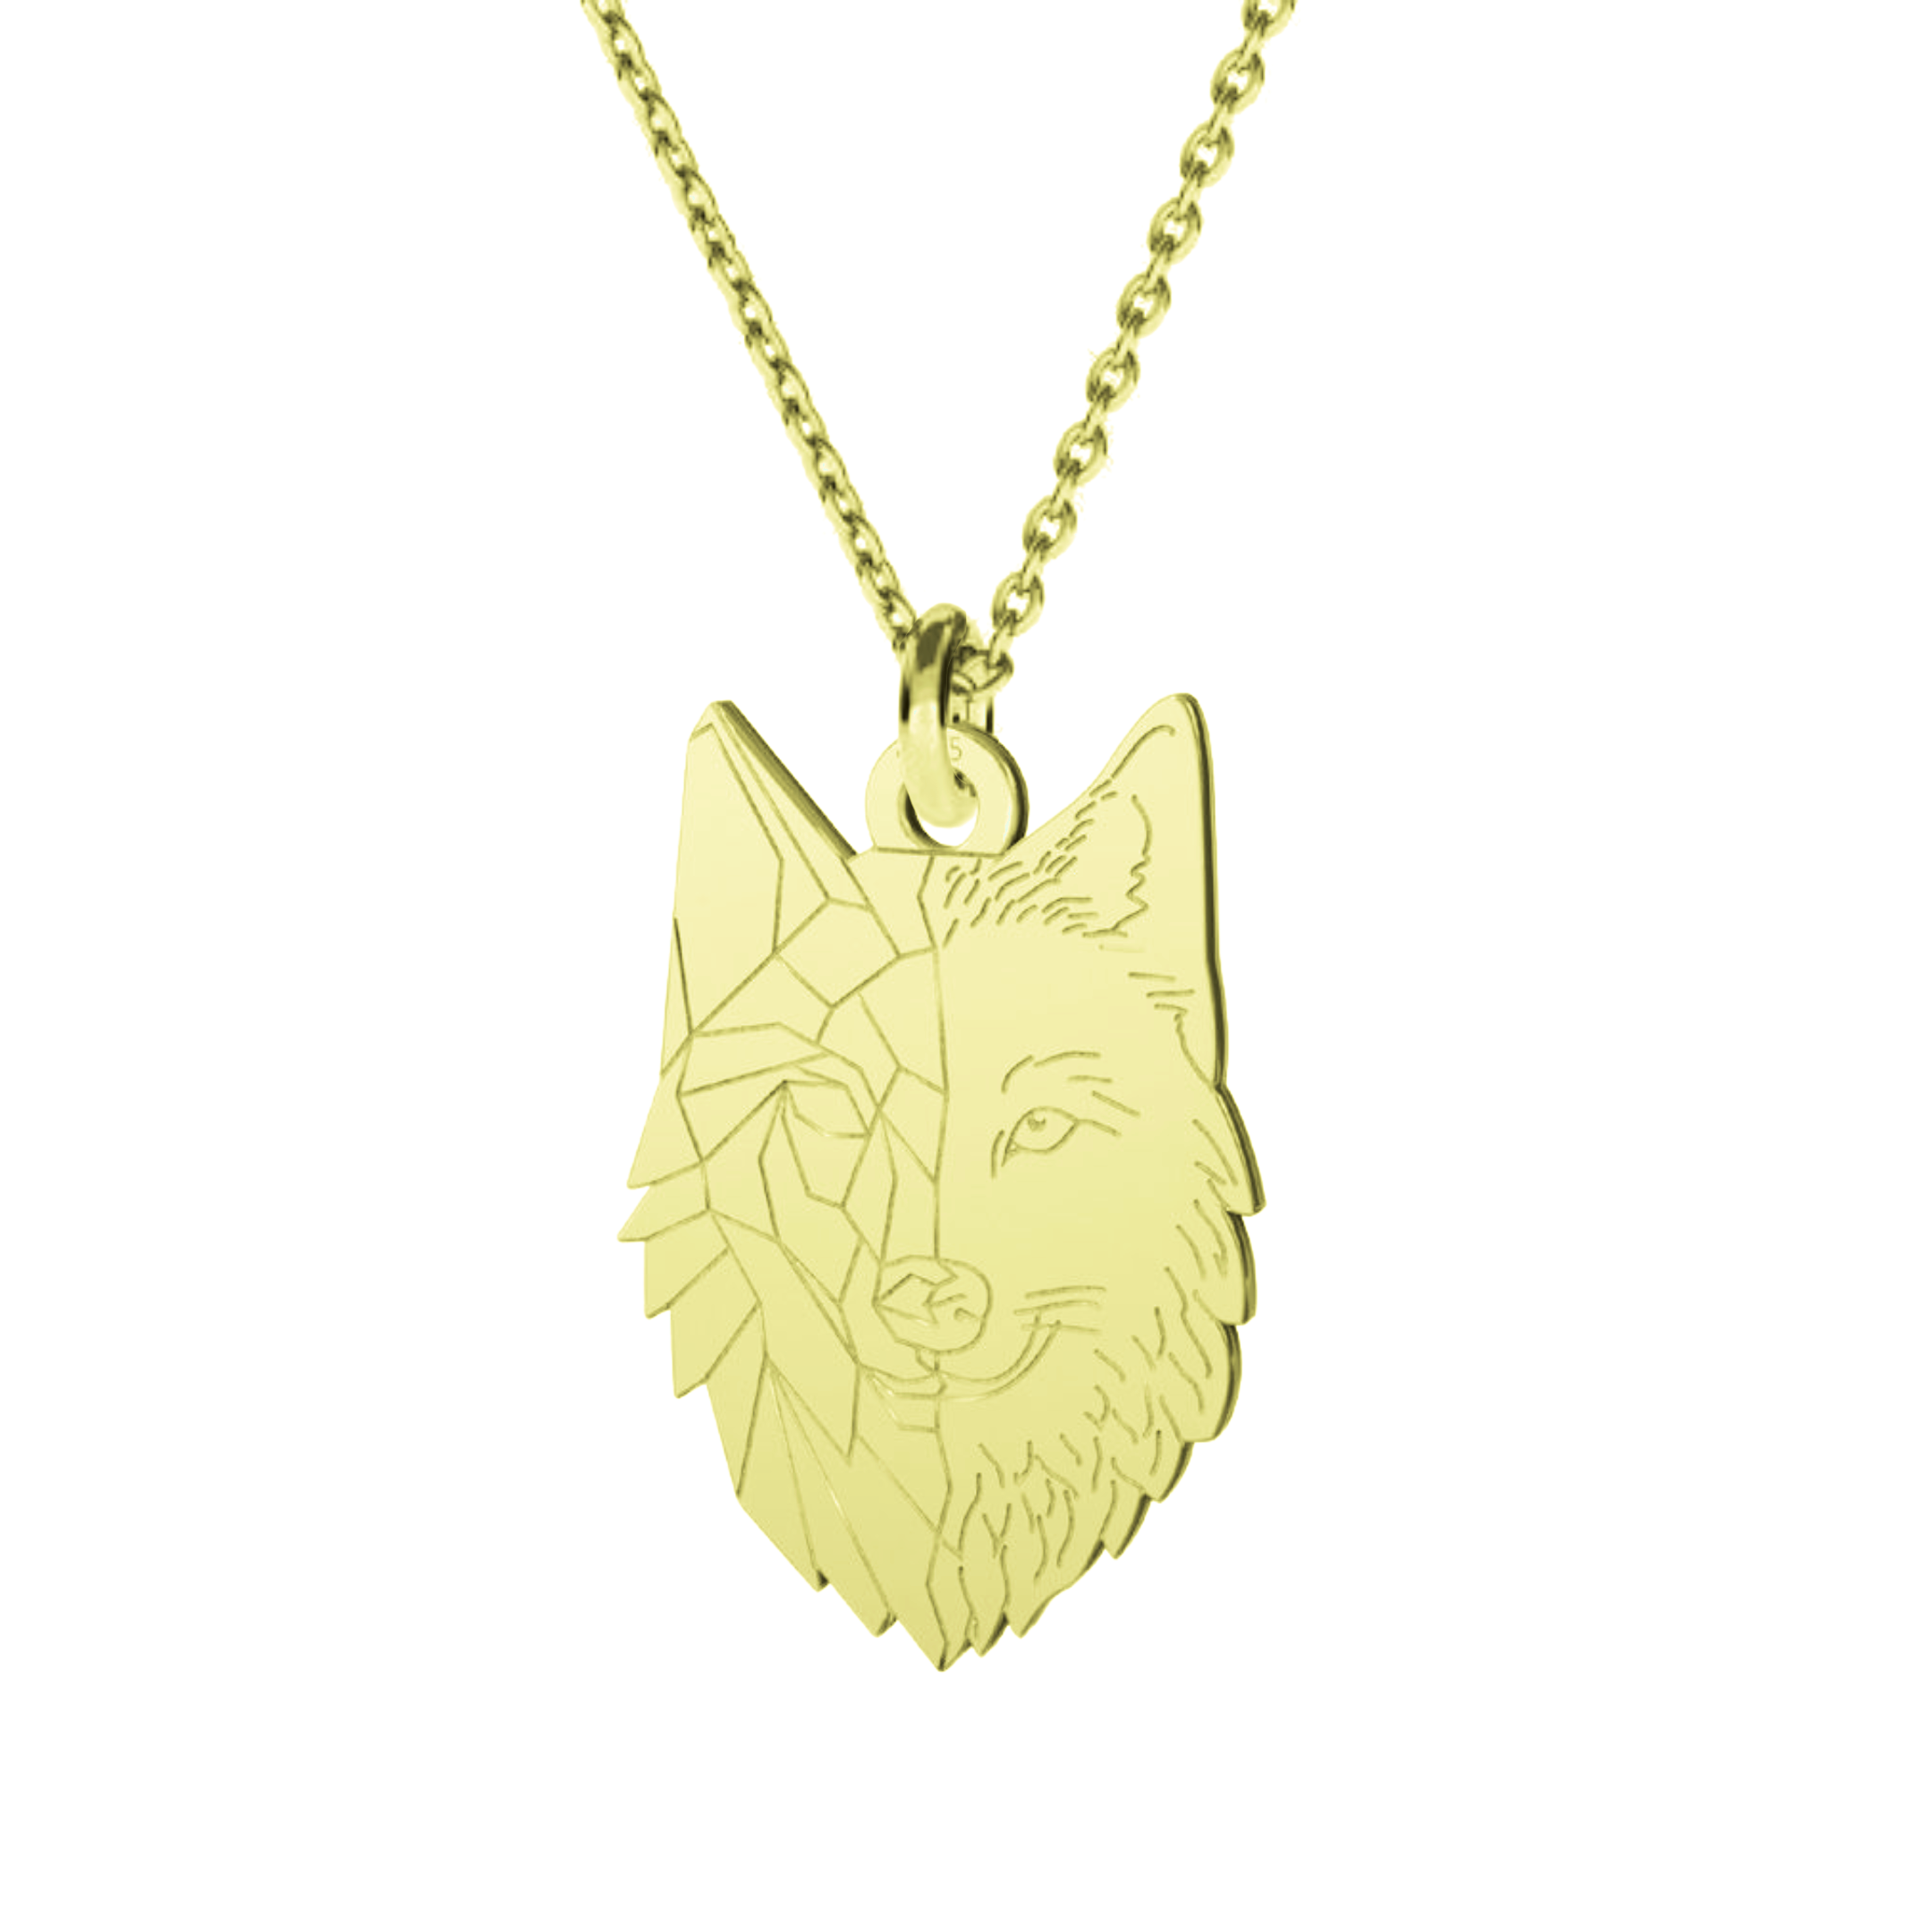 Wildheart - a wolf / werewolf pendant necklace in silver of gold